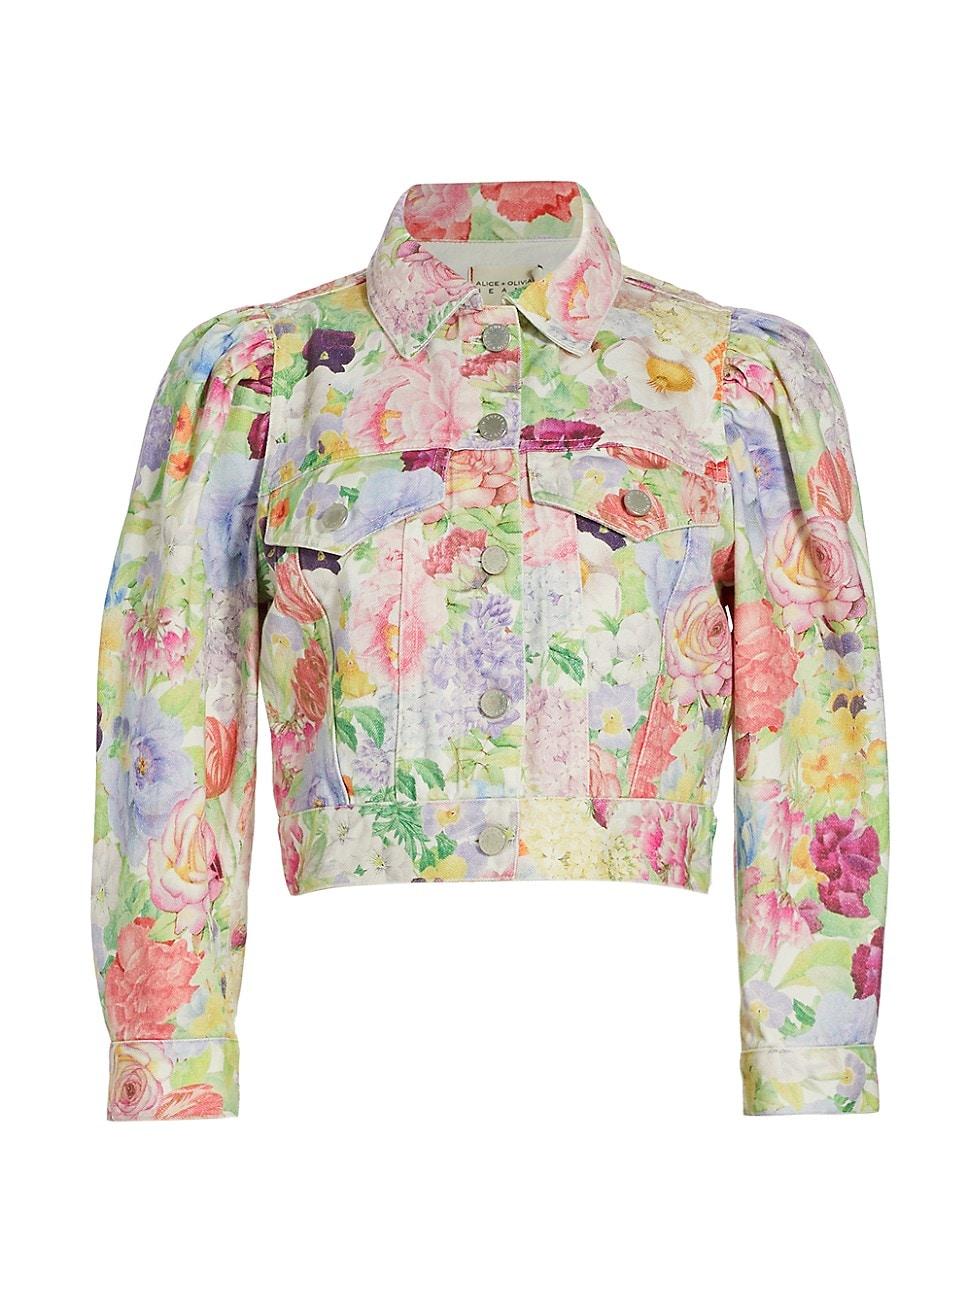 Alice + Olivia Lana Floral Puffed Sleeve Denim Jacket in White | Lyst